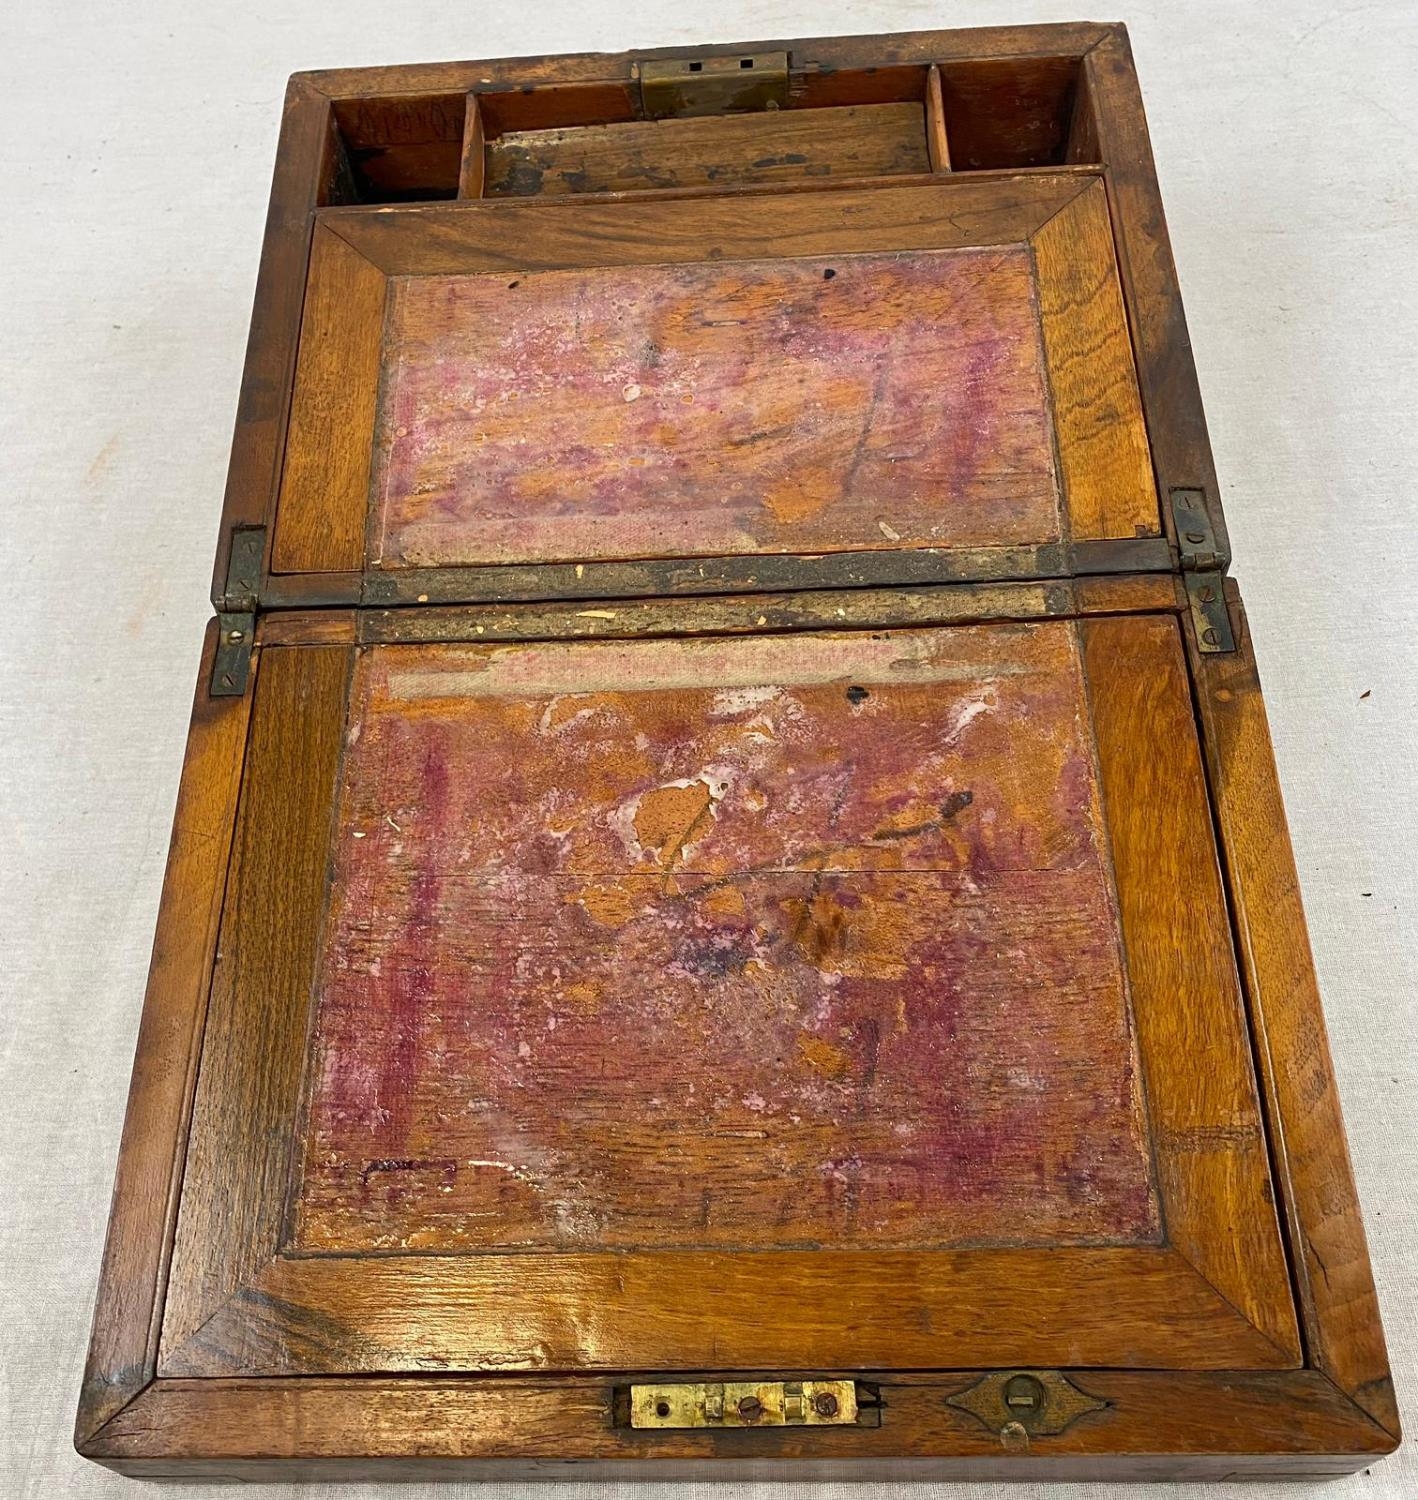 A Late Victorian writing slope. Complete interior with a broken key. Dimensions: 30 x 22 x 15 cm - Bild 4 aus 4